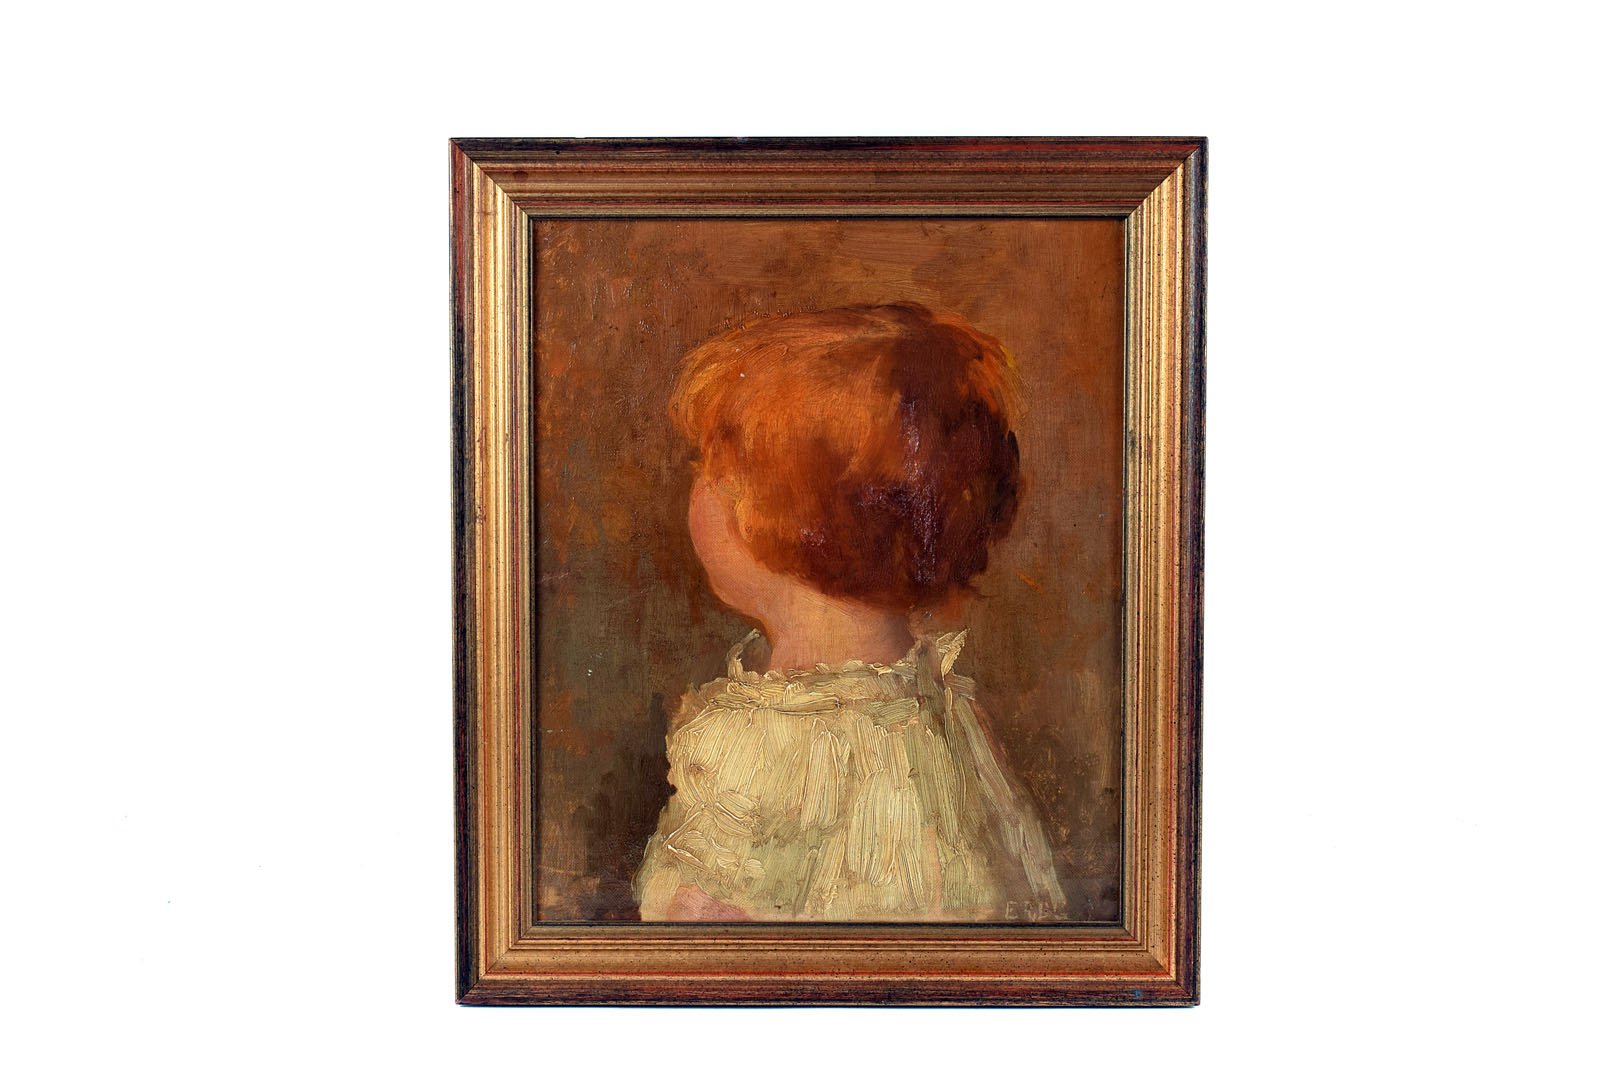 An impressionistic oil on canvas, now laid on board, depicting the shoulders and head of a young boy